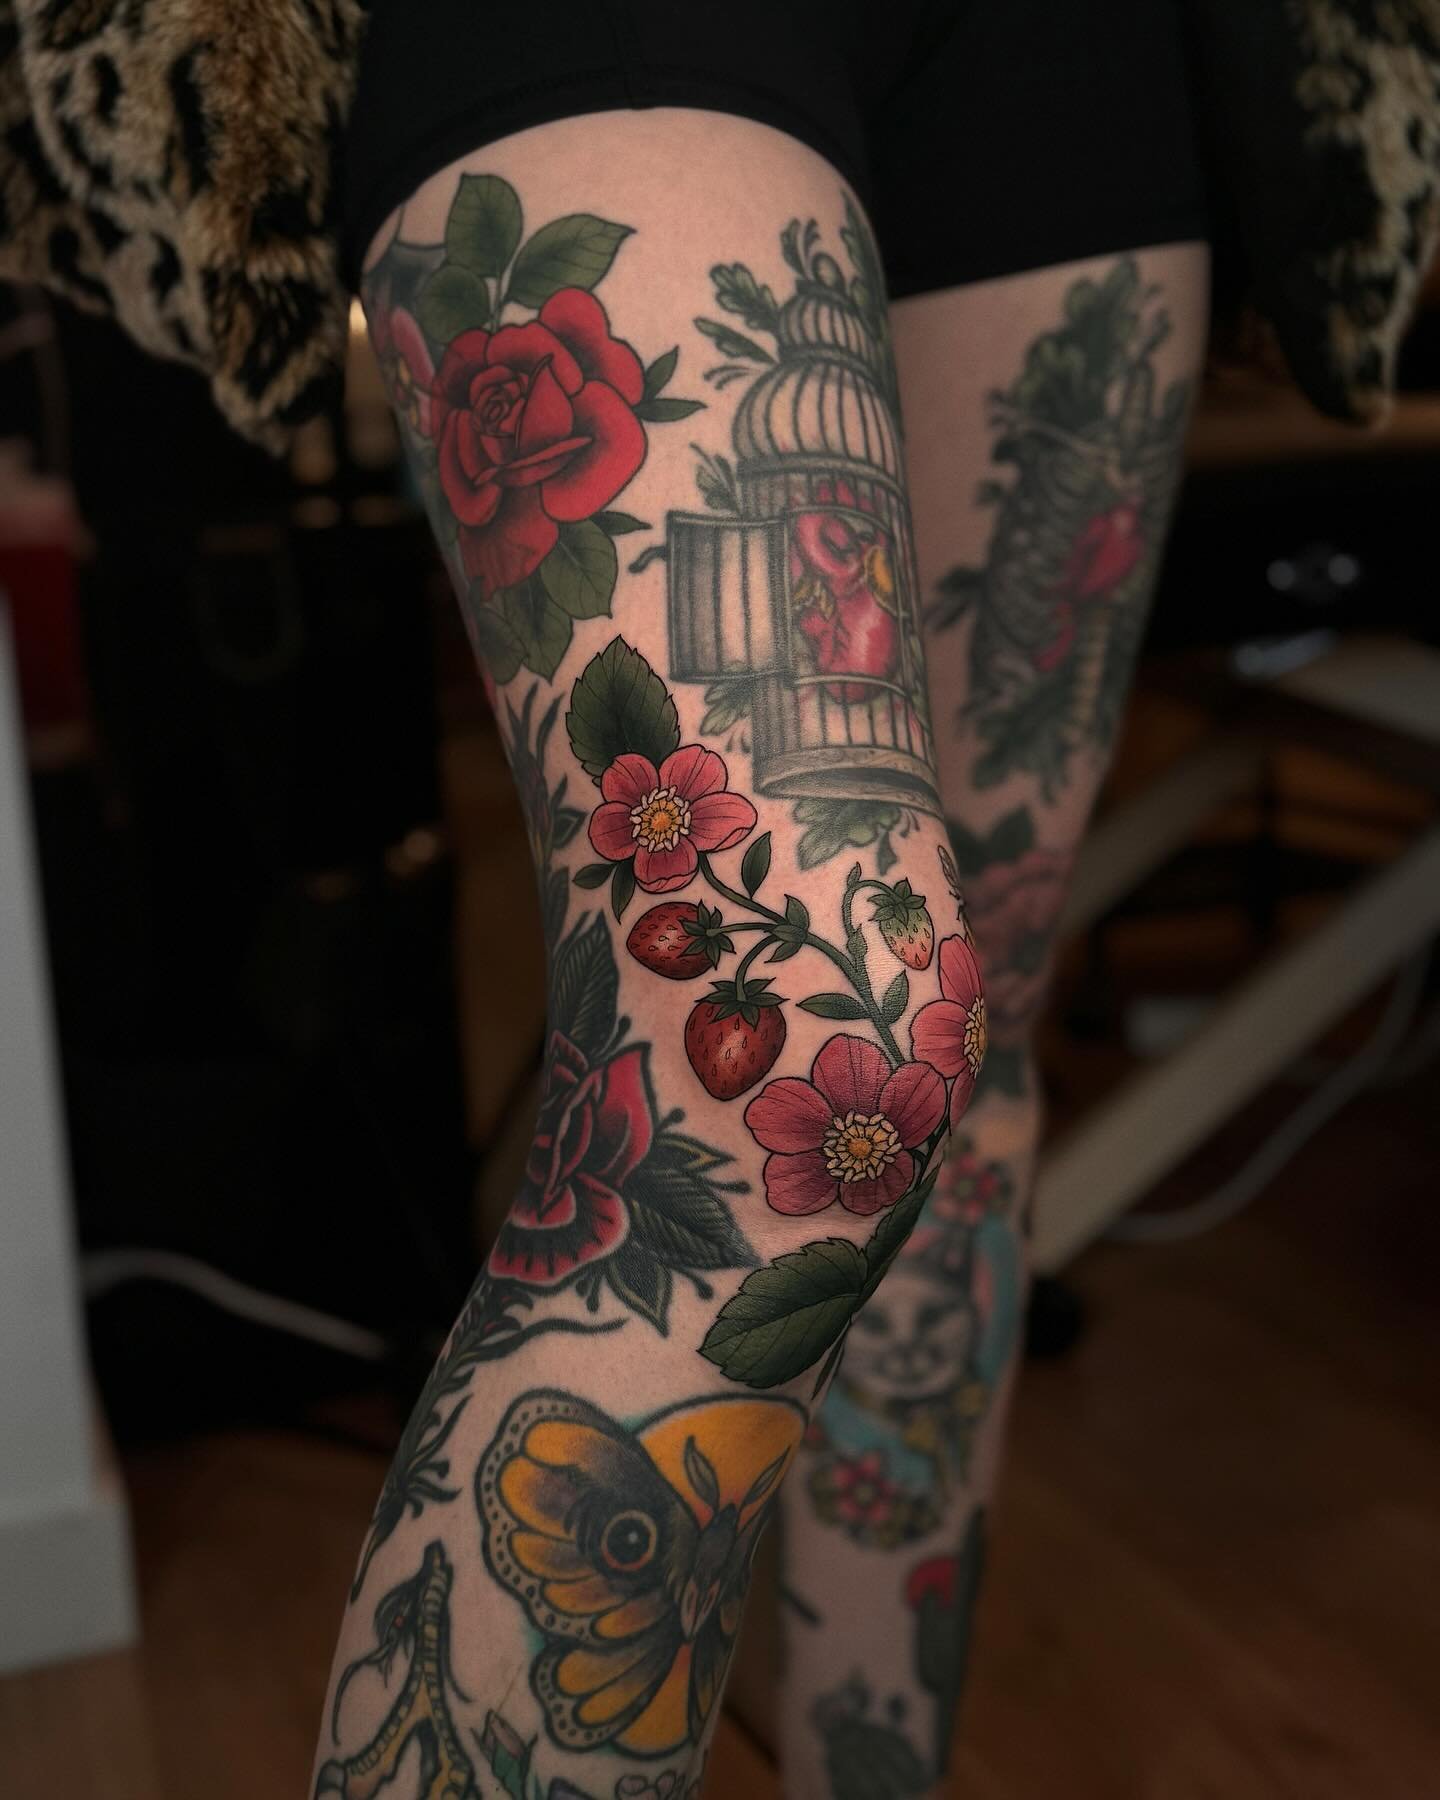 Filled in @heartofglasshair gap on their knee last week! Just some spicy lil strawberries and blossoms. Ps. Gonna send out just a couple more consult emails (literally fitting in everyone I possible can, there&rsquo;s actually TOO MANY amazing ideas)